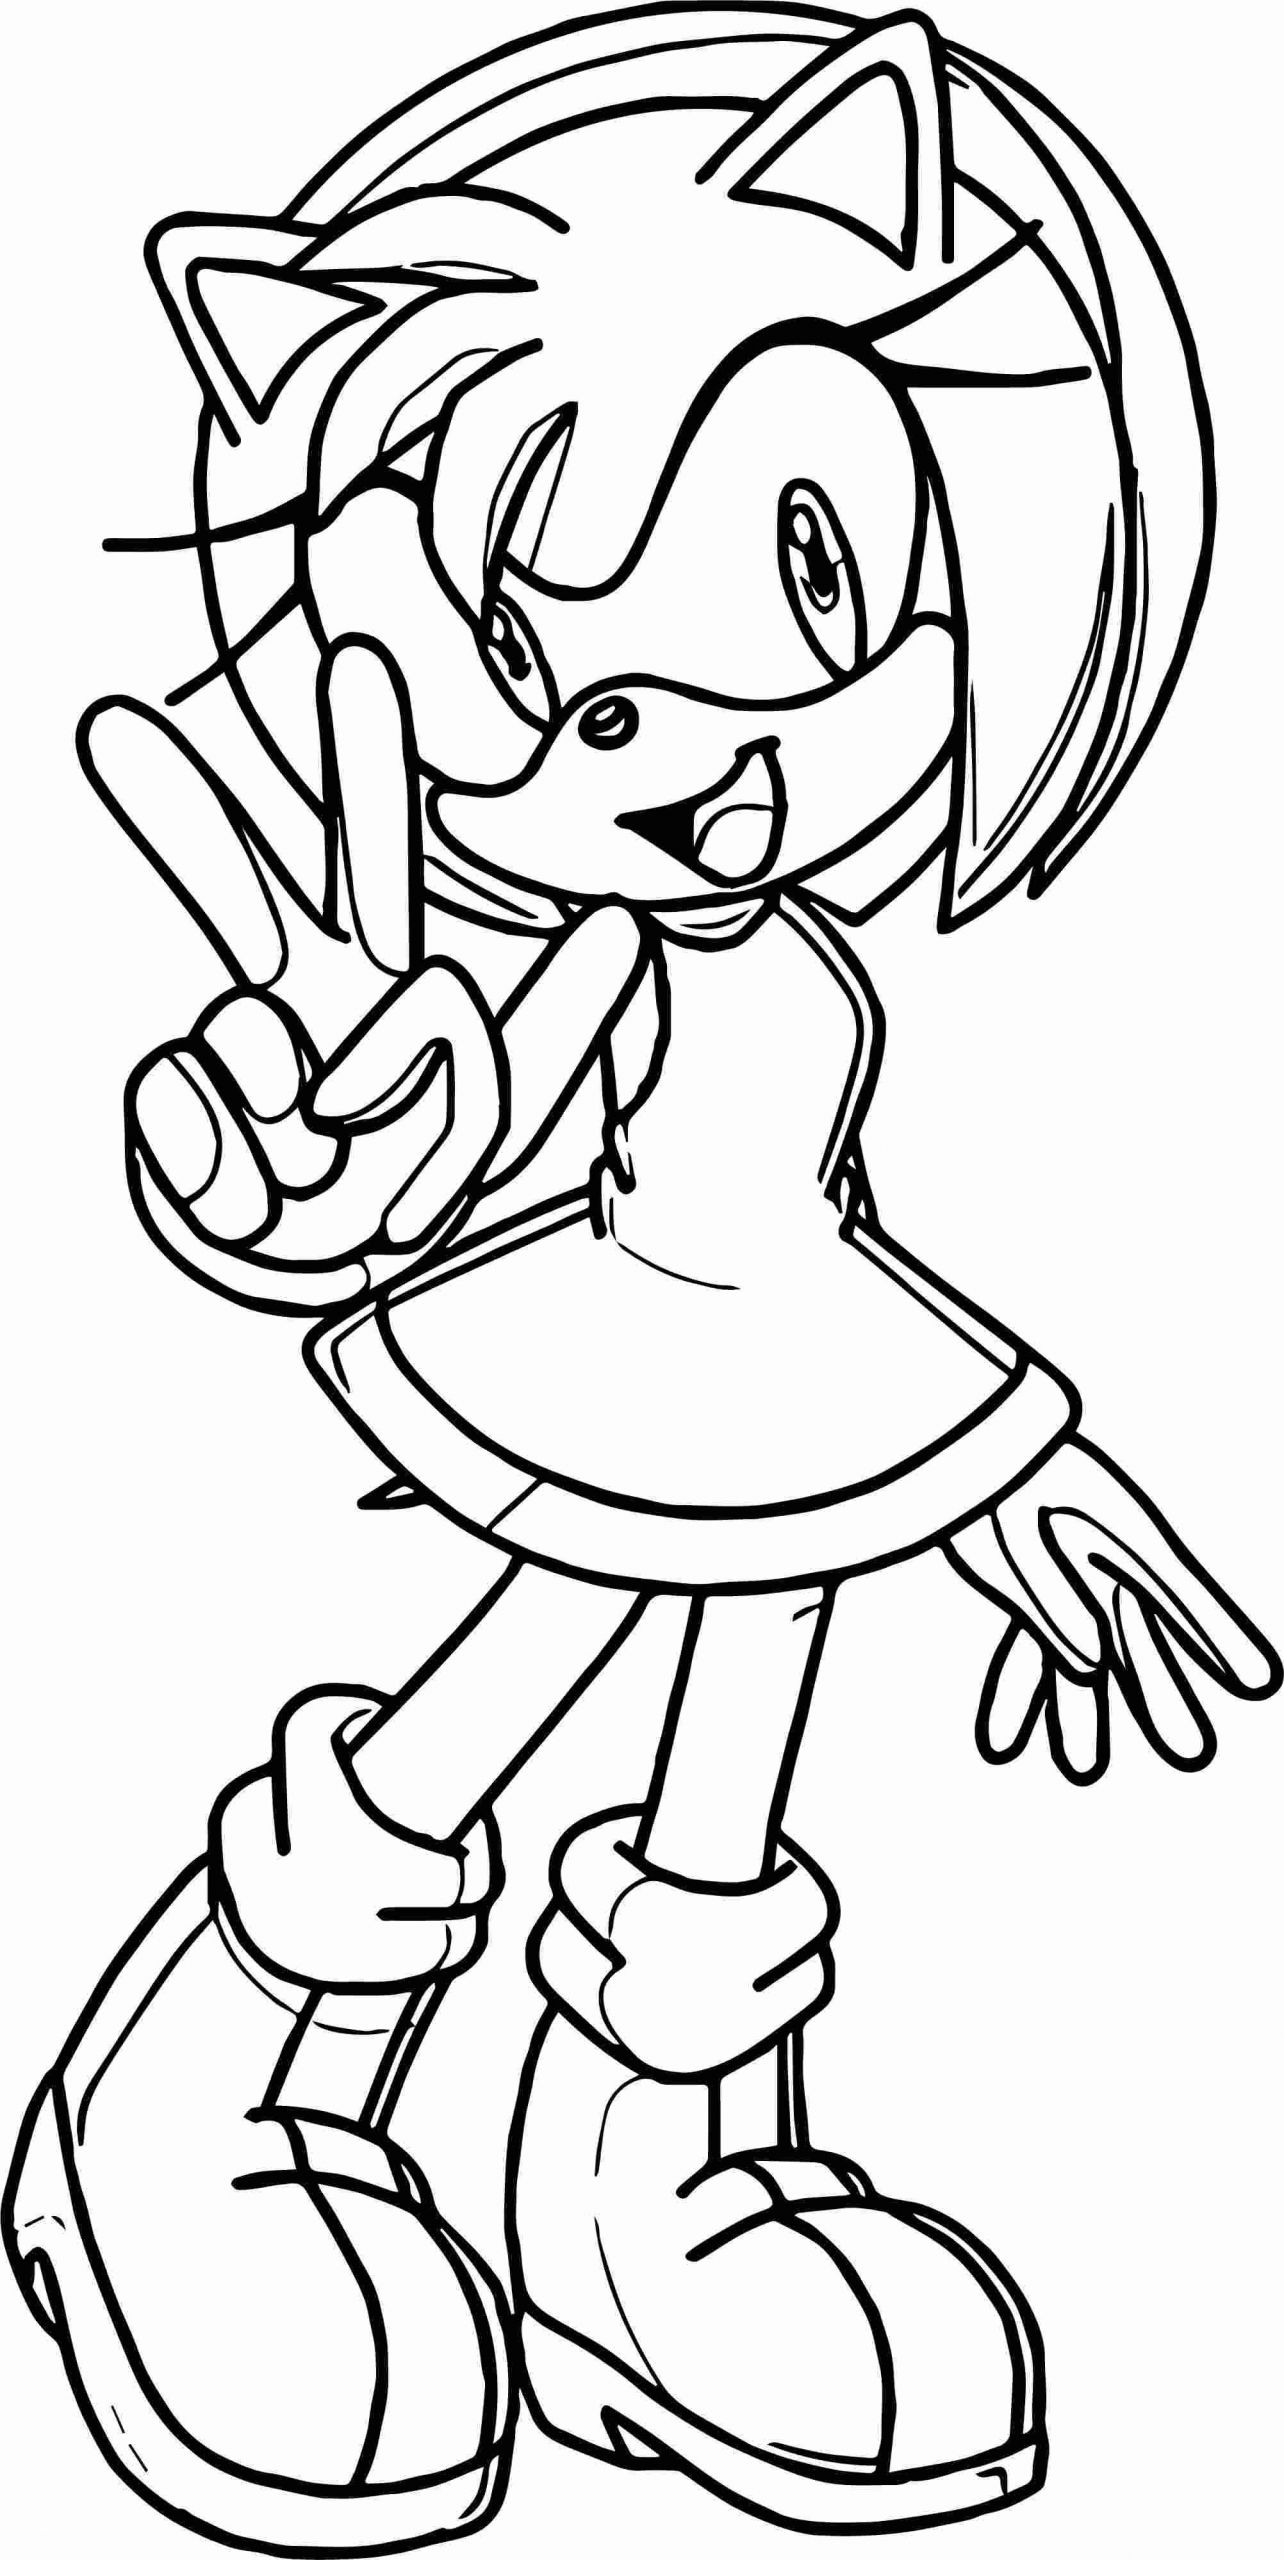 coloring pages : Sonic And Friends Coloring Pages Lovely Coloring Pages Amy  Rose Coloring Pages Print Sonic and Friends Coloring Pages ~  affiliateprogrambook.com